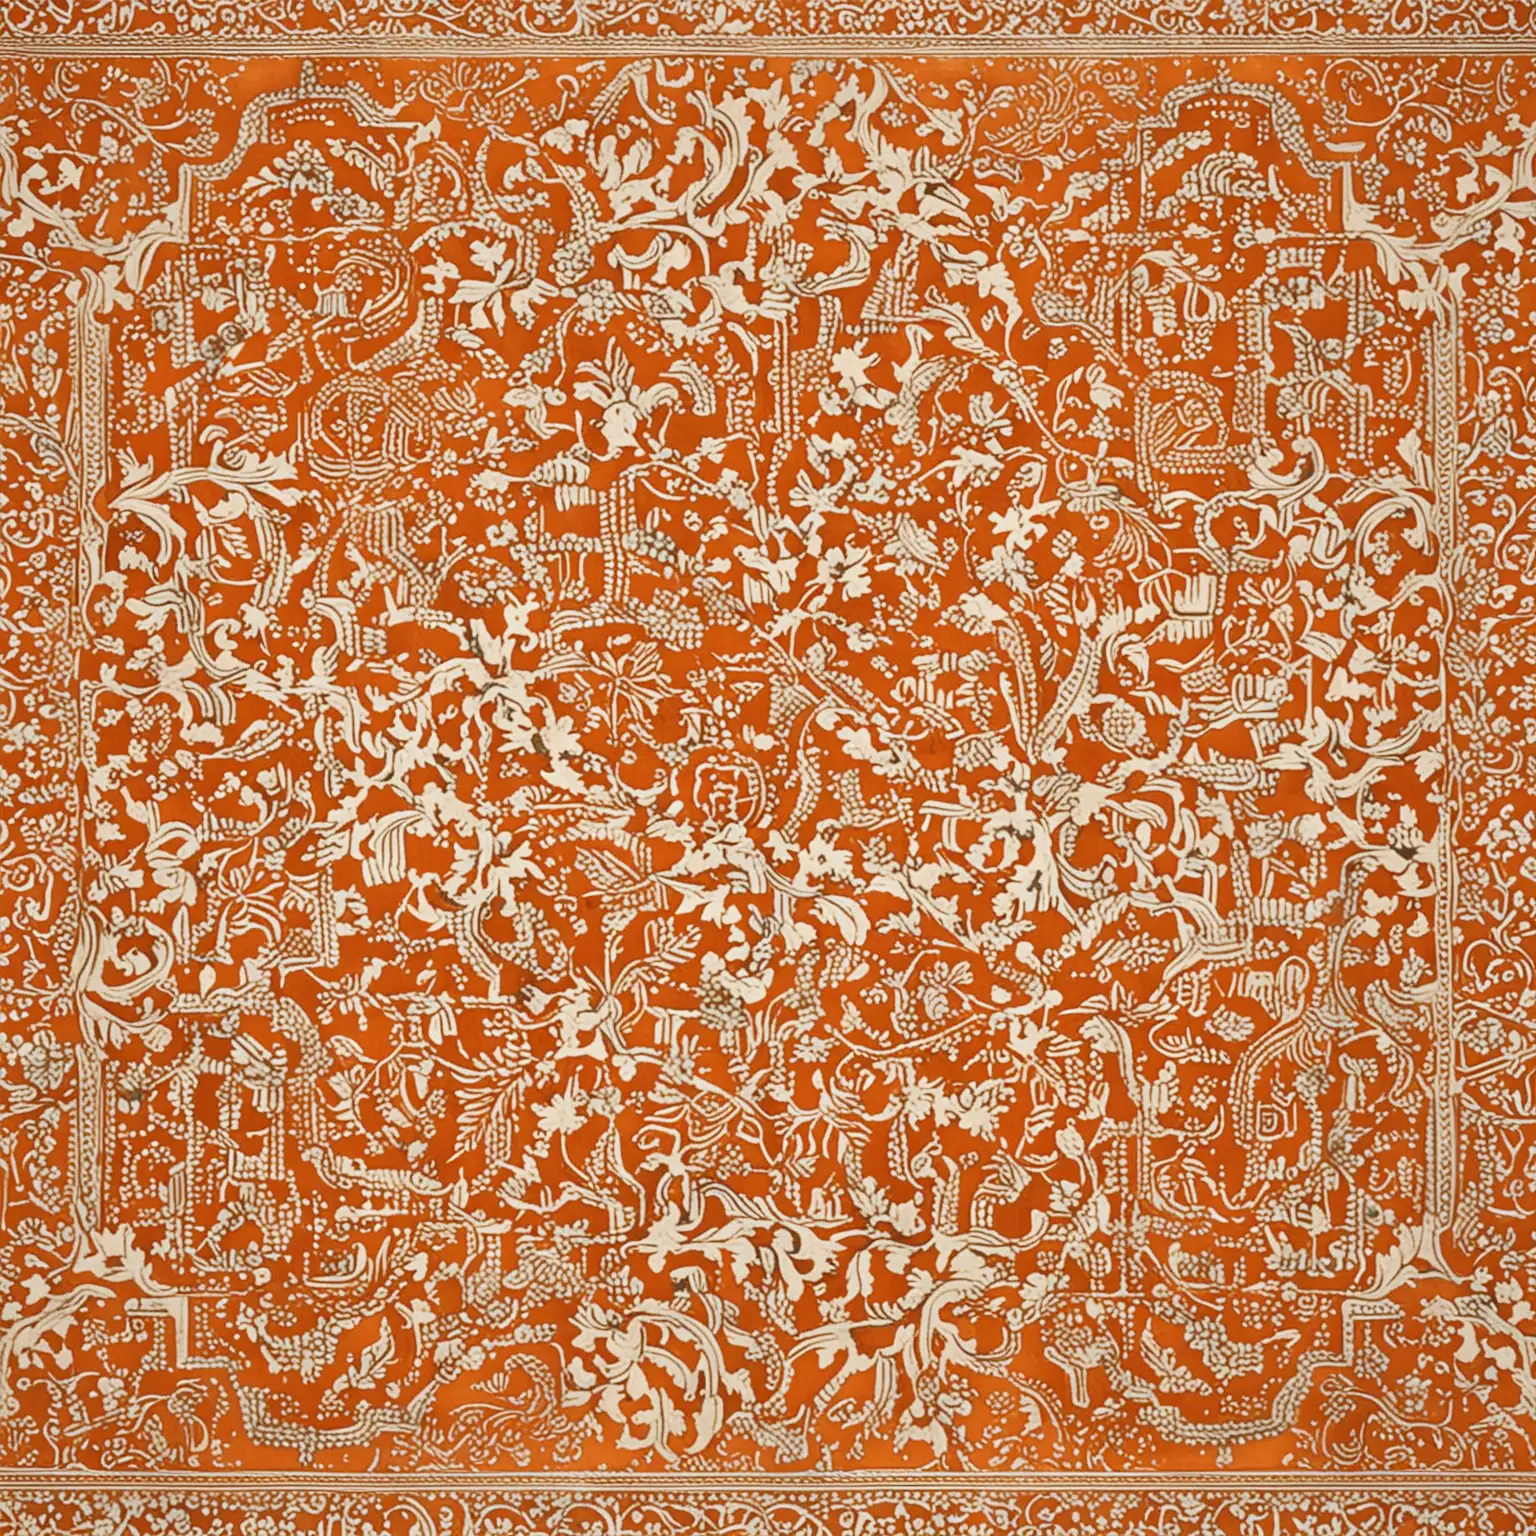 Amer-Fort-Palace-Inspired-Seamless-Wall-Decoration-Pattern